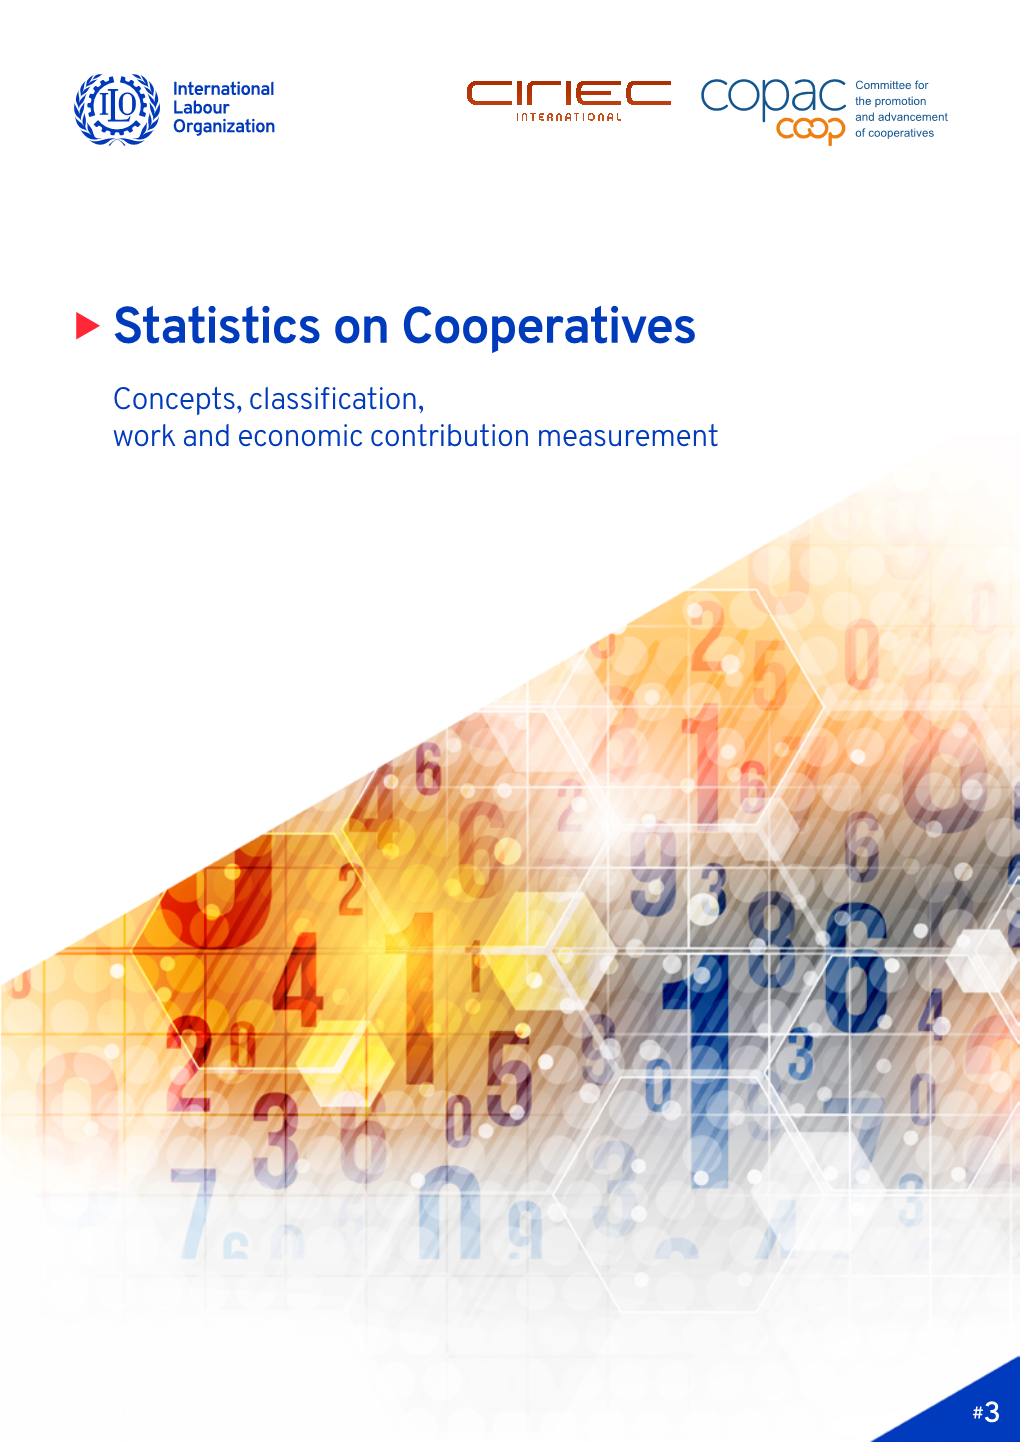 Statistics on Cooperatives: Concepts, Classification, Work and Economic Contribution Measurement